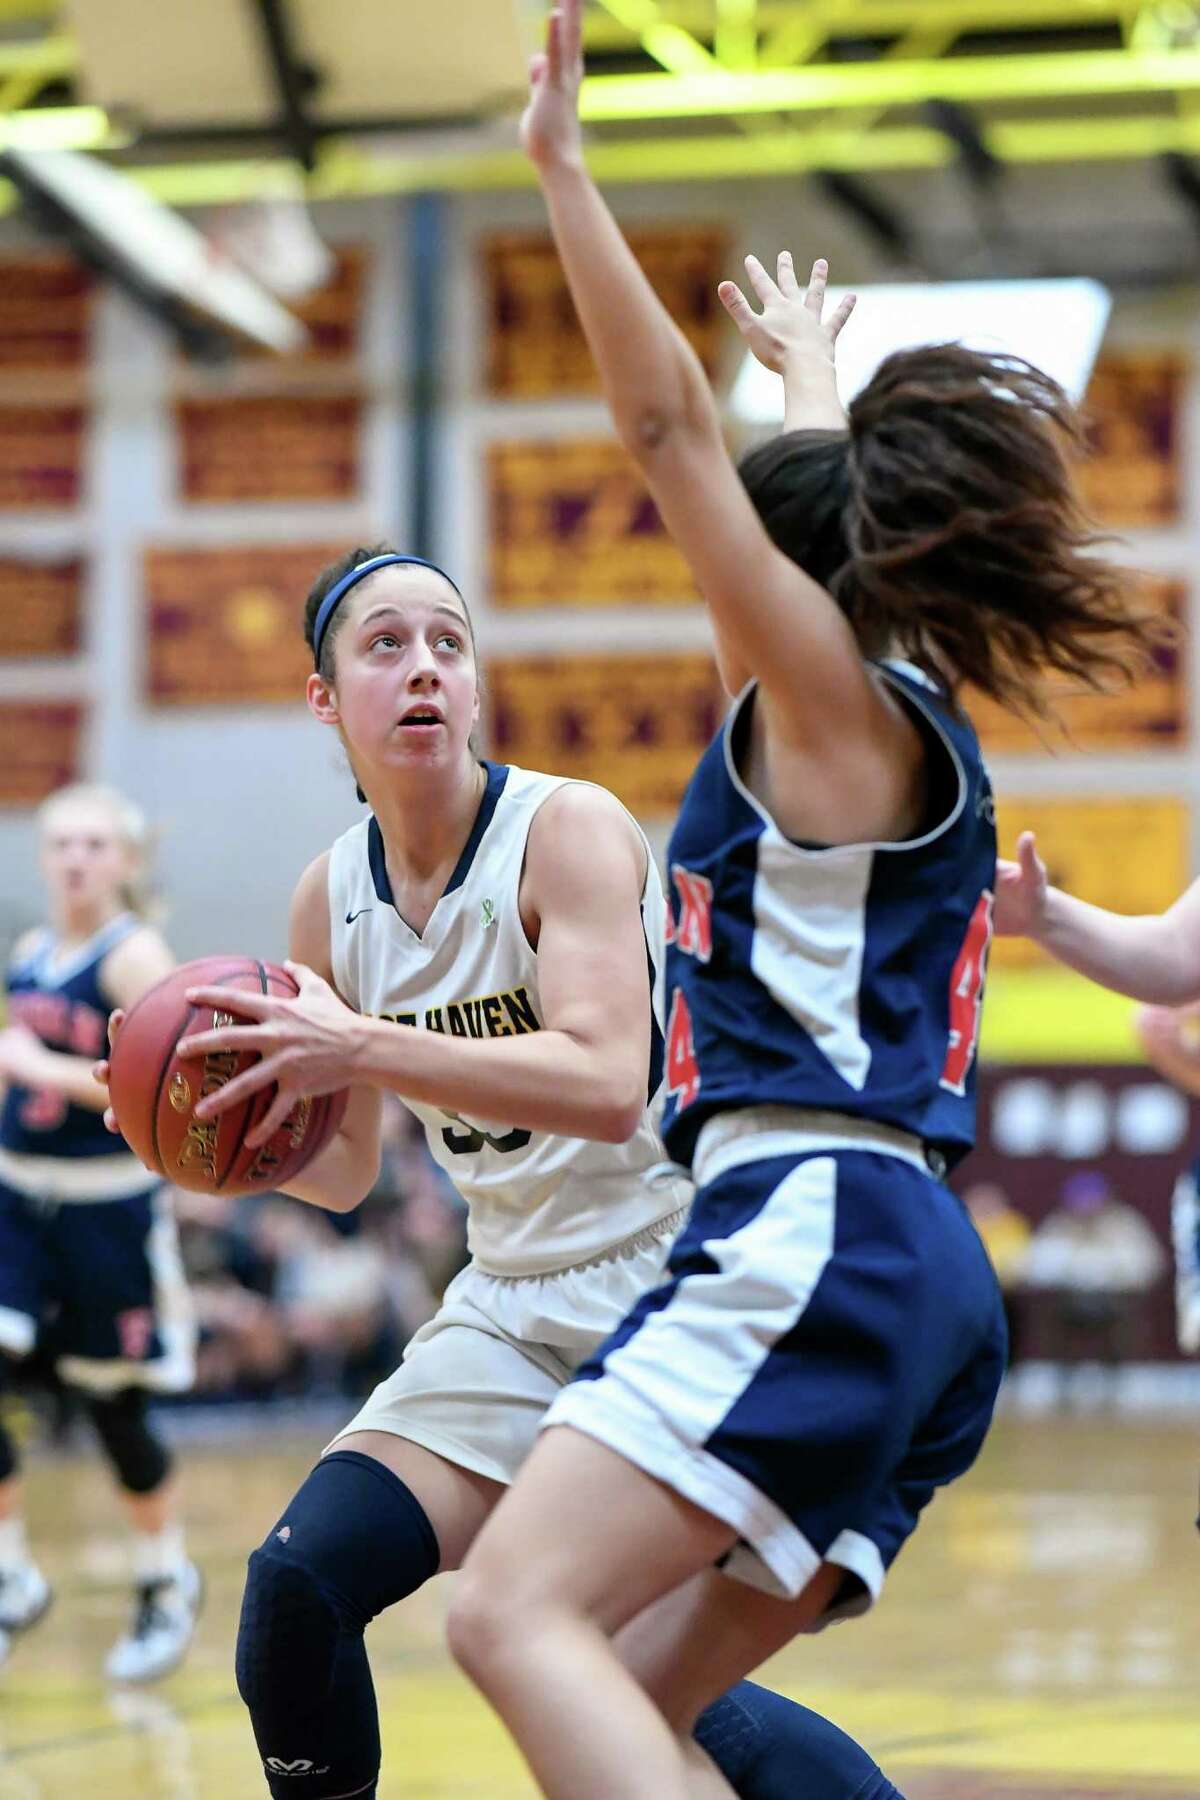 East Haven’s Taylor Salato looks for an opening on Saturday against Foran in the SCC girls basketball tournament quarterfinals.